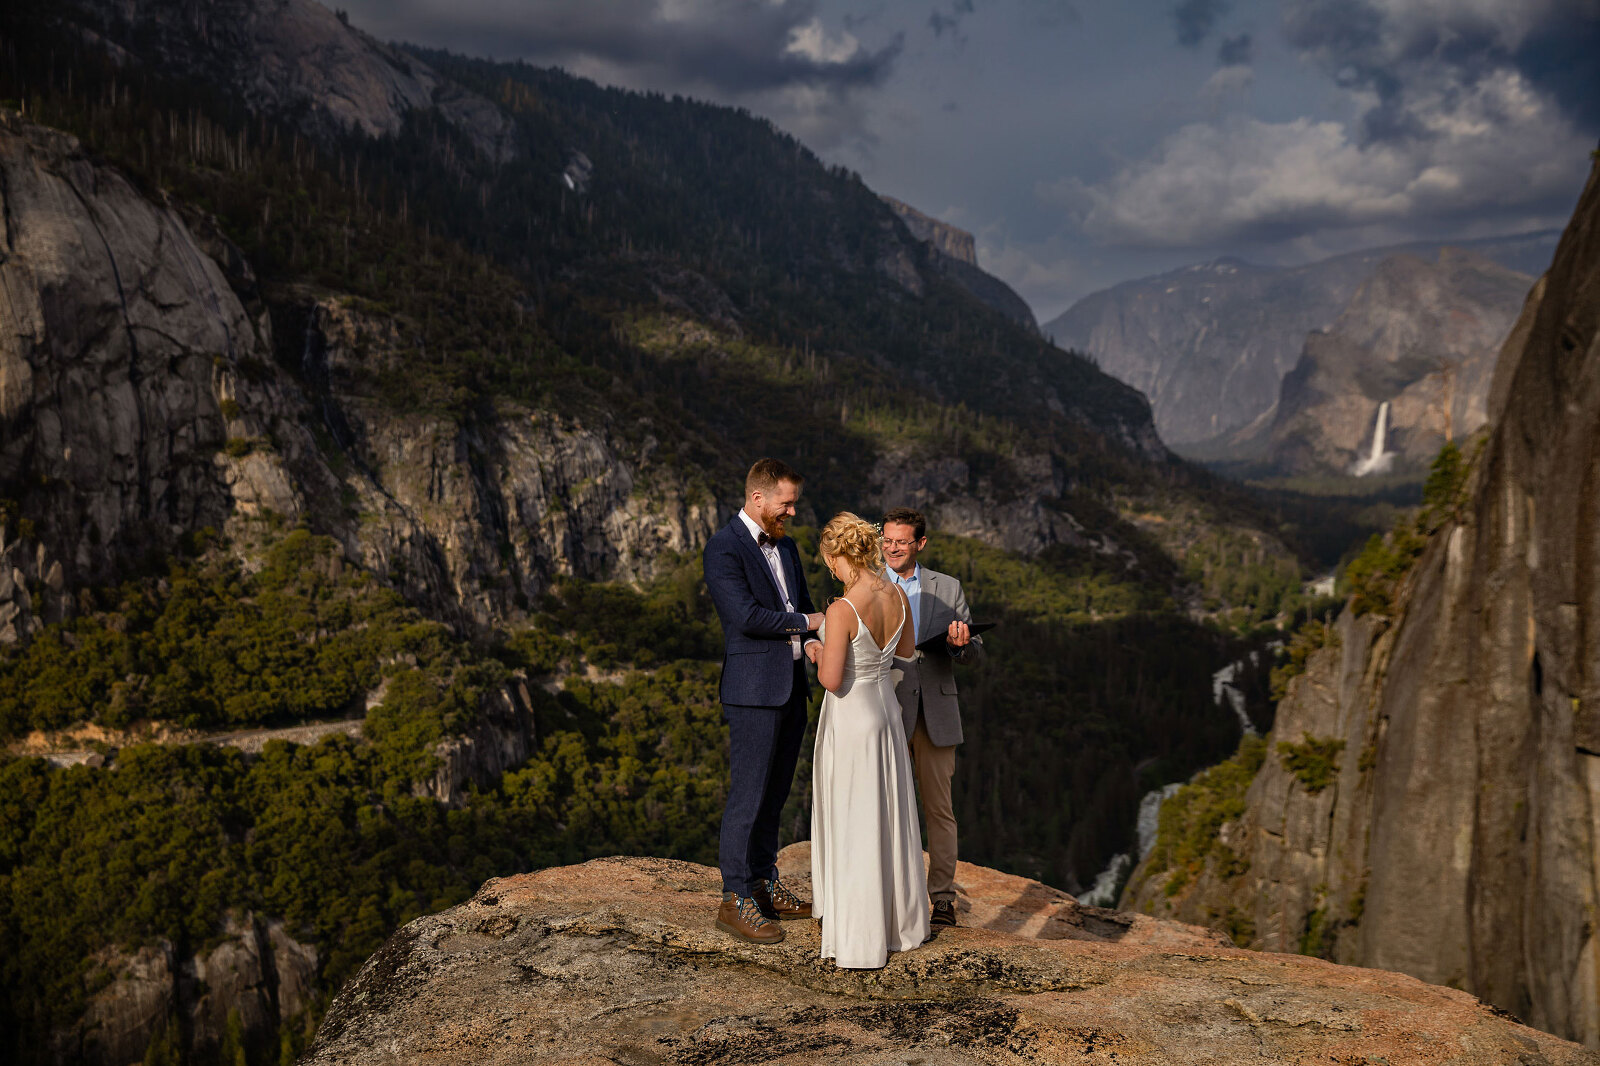 A Bride and Groom with the officiant having a wedding ceremony with mountains